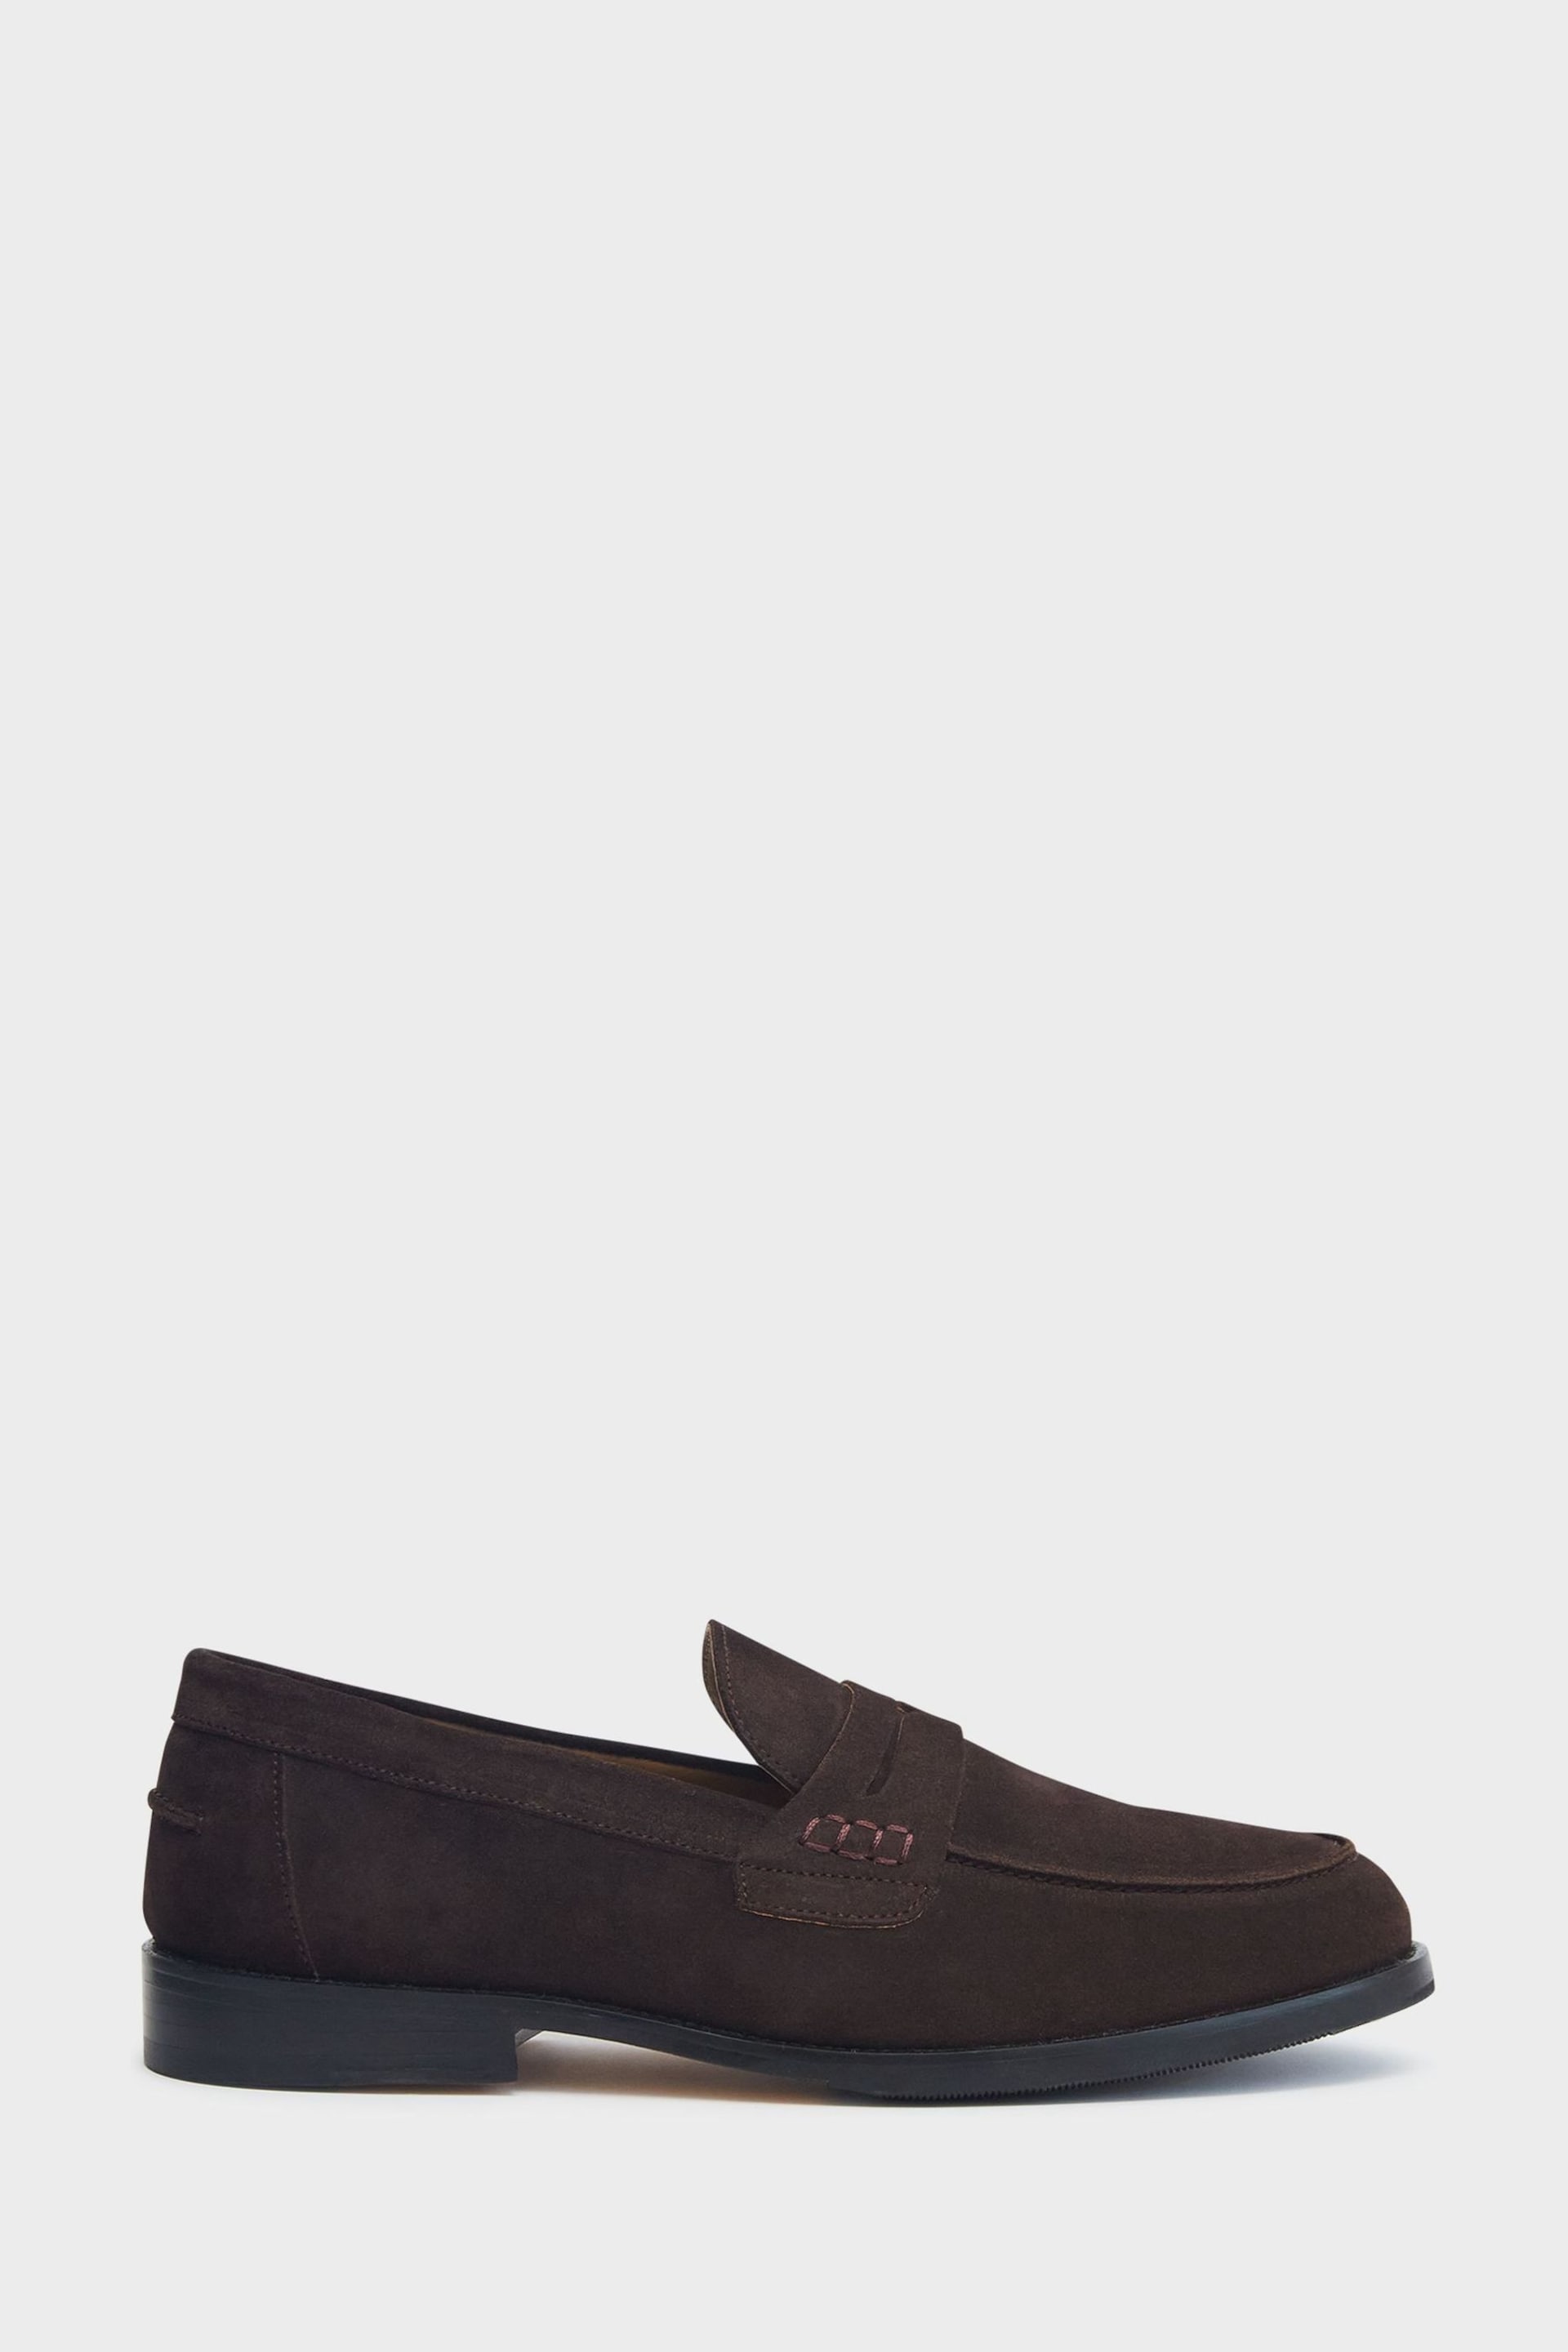 Crew Clothing Smart Suede Loafer - Image 2 of 4